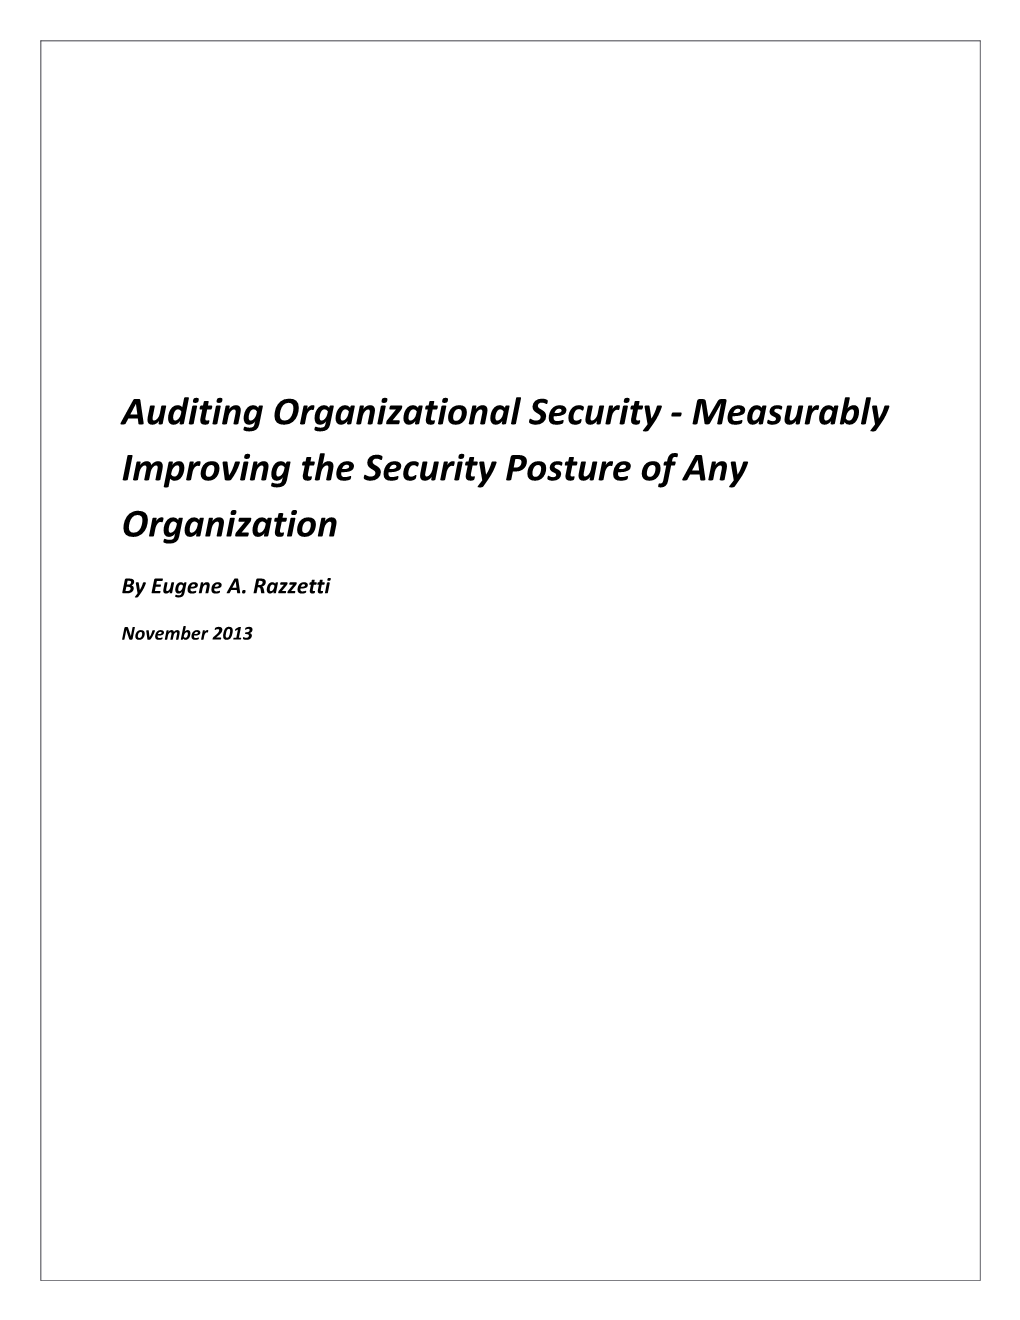 Auditing Organizational Security - Measurably Improving the Security Posture of Any